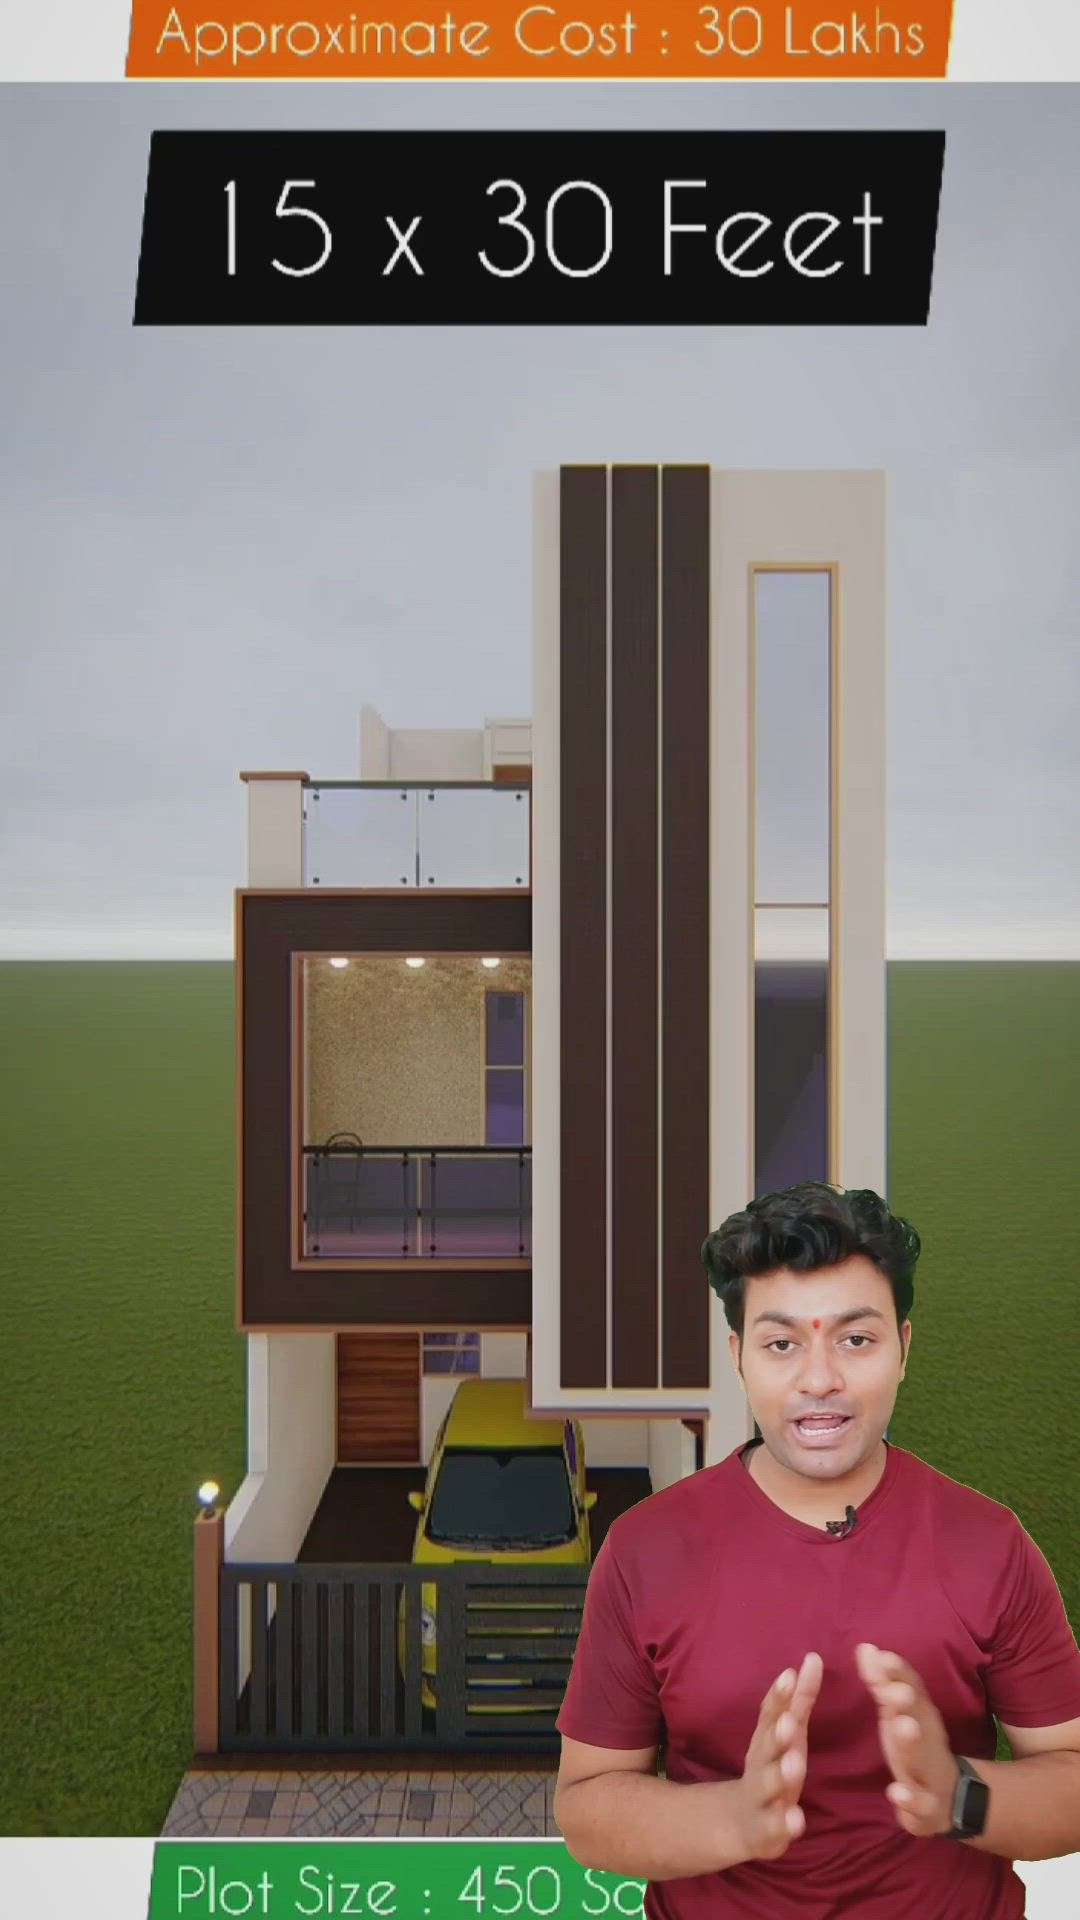 15×30 / 450 Sq.ft. 3D View #oyospace #mahendravivrekar 
@oyospace @mahendravivrekar @engineerchaiwale
.
#buy #rent #sell #architect #oyospace
Contact 📲 7024585864 
.
.
.
#realestate #koloviral  #trending #realty #realstateagent  #realtor #realestateagent #home #property #dreamhome  #interiordesign #luxuryrealestate #newhome #architecture #house #realestateinvesting #luxuryhomes #realestatelife #business #design #realestateinvestor #realty #sold #broker #homesforsale